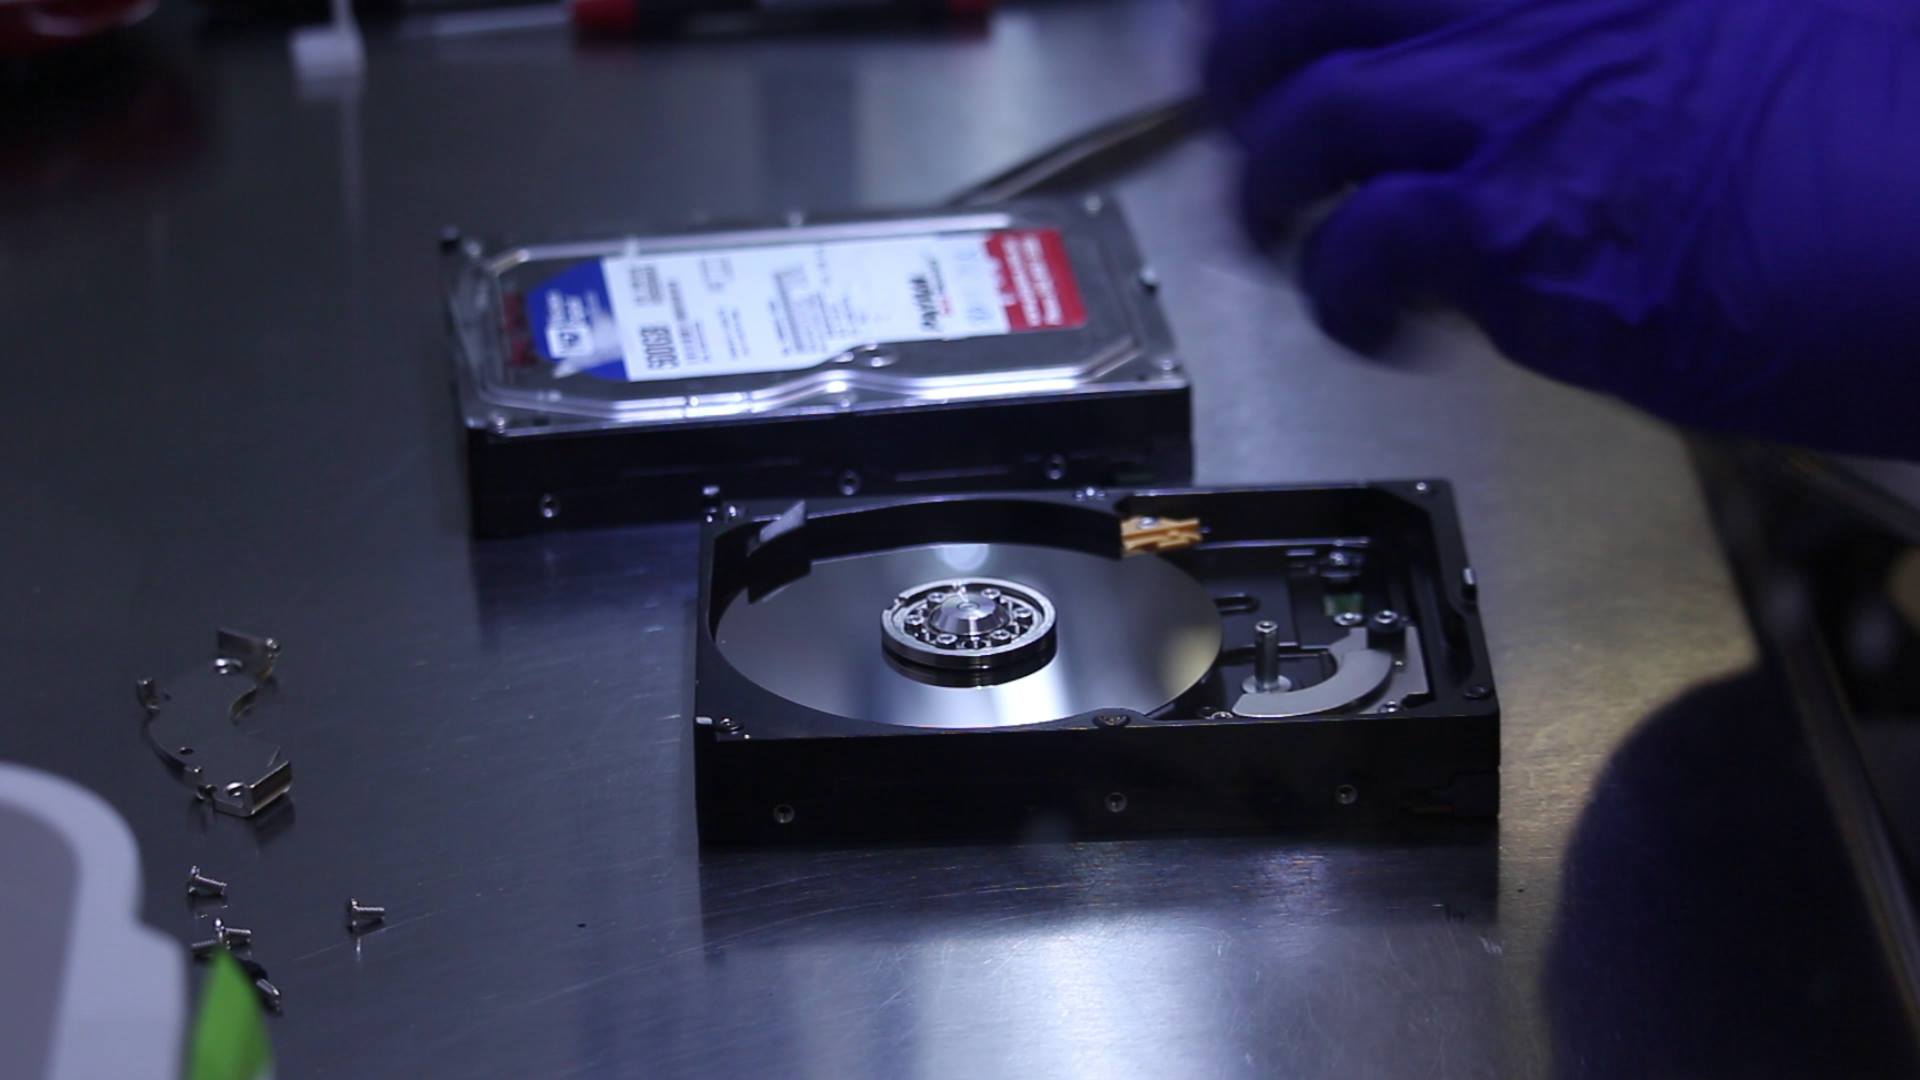 Data Recovery Services From A Broken Hard Drive